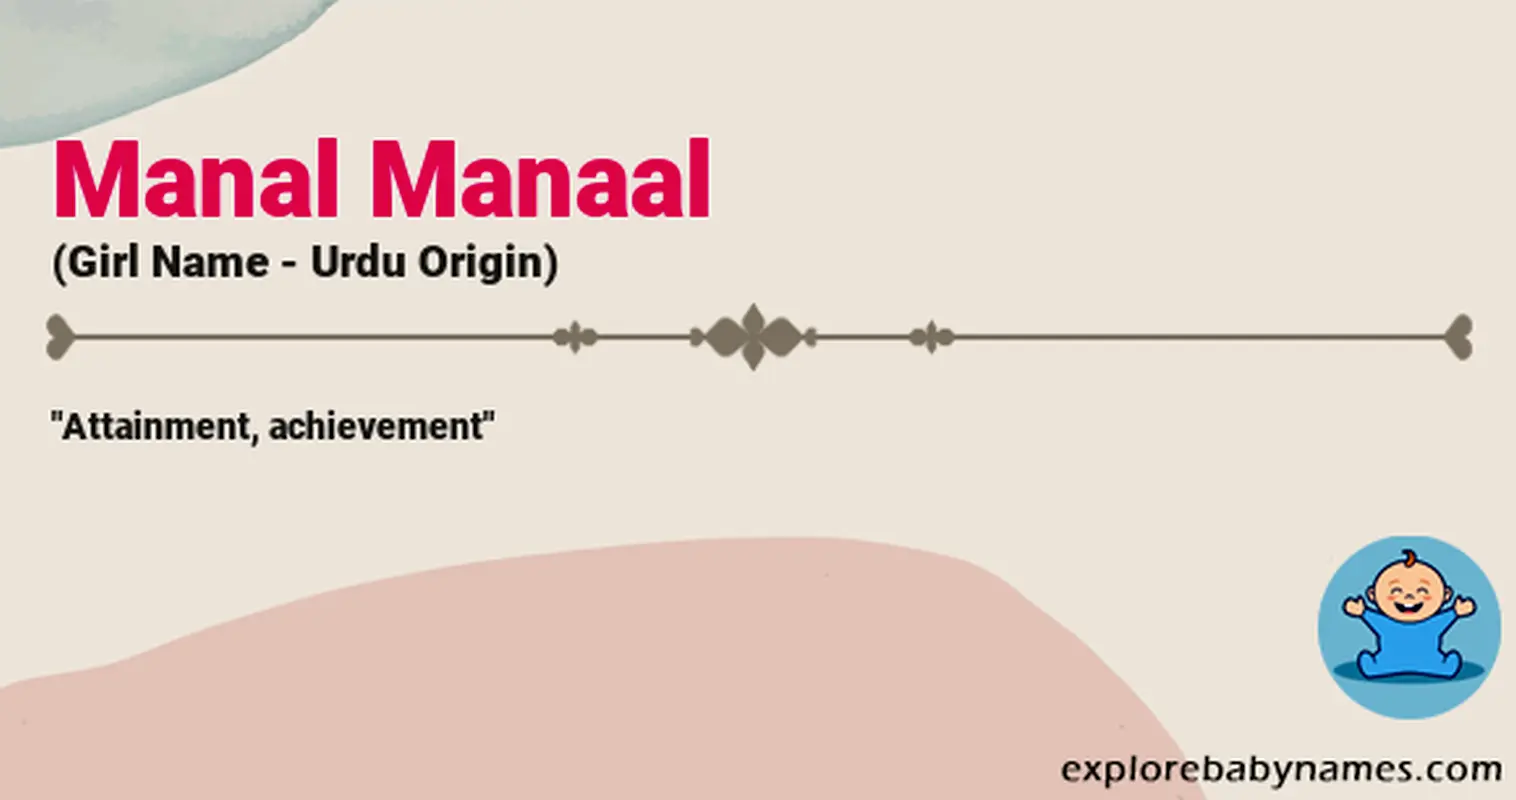 Meaning of Manal Manaal